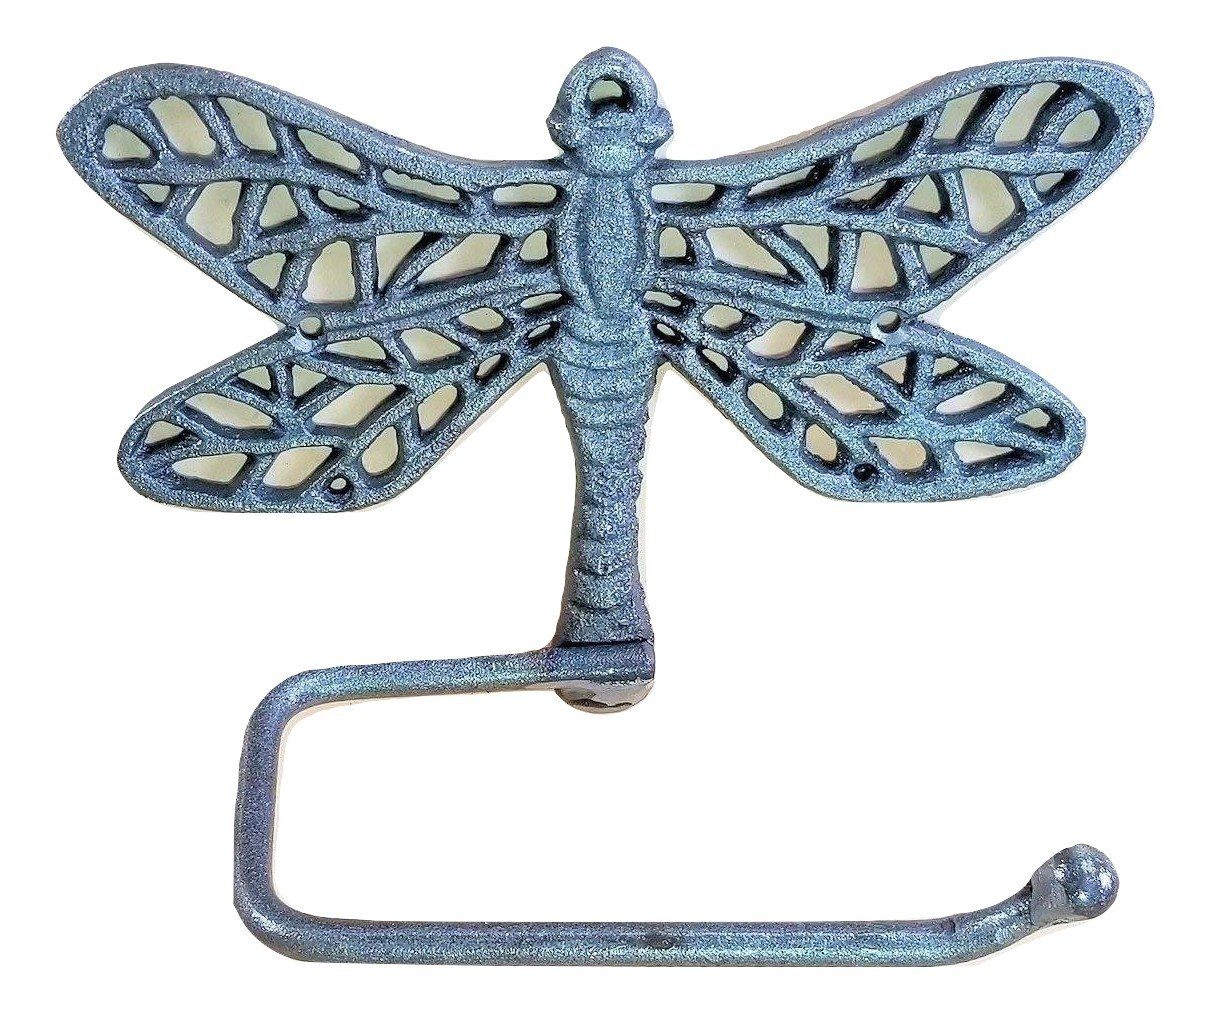 Cast Iron Dragonfly Toilet Paper Holder for the wall bath accessories Carvers Olde Iron 